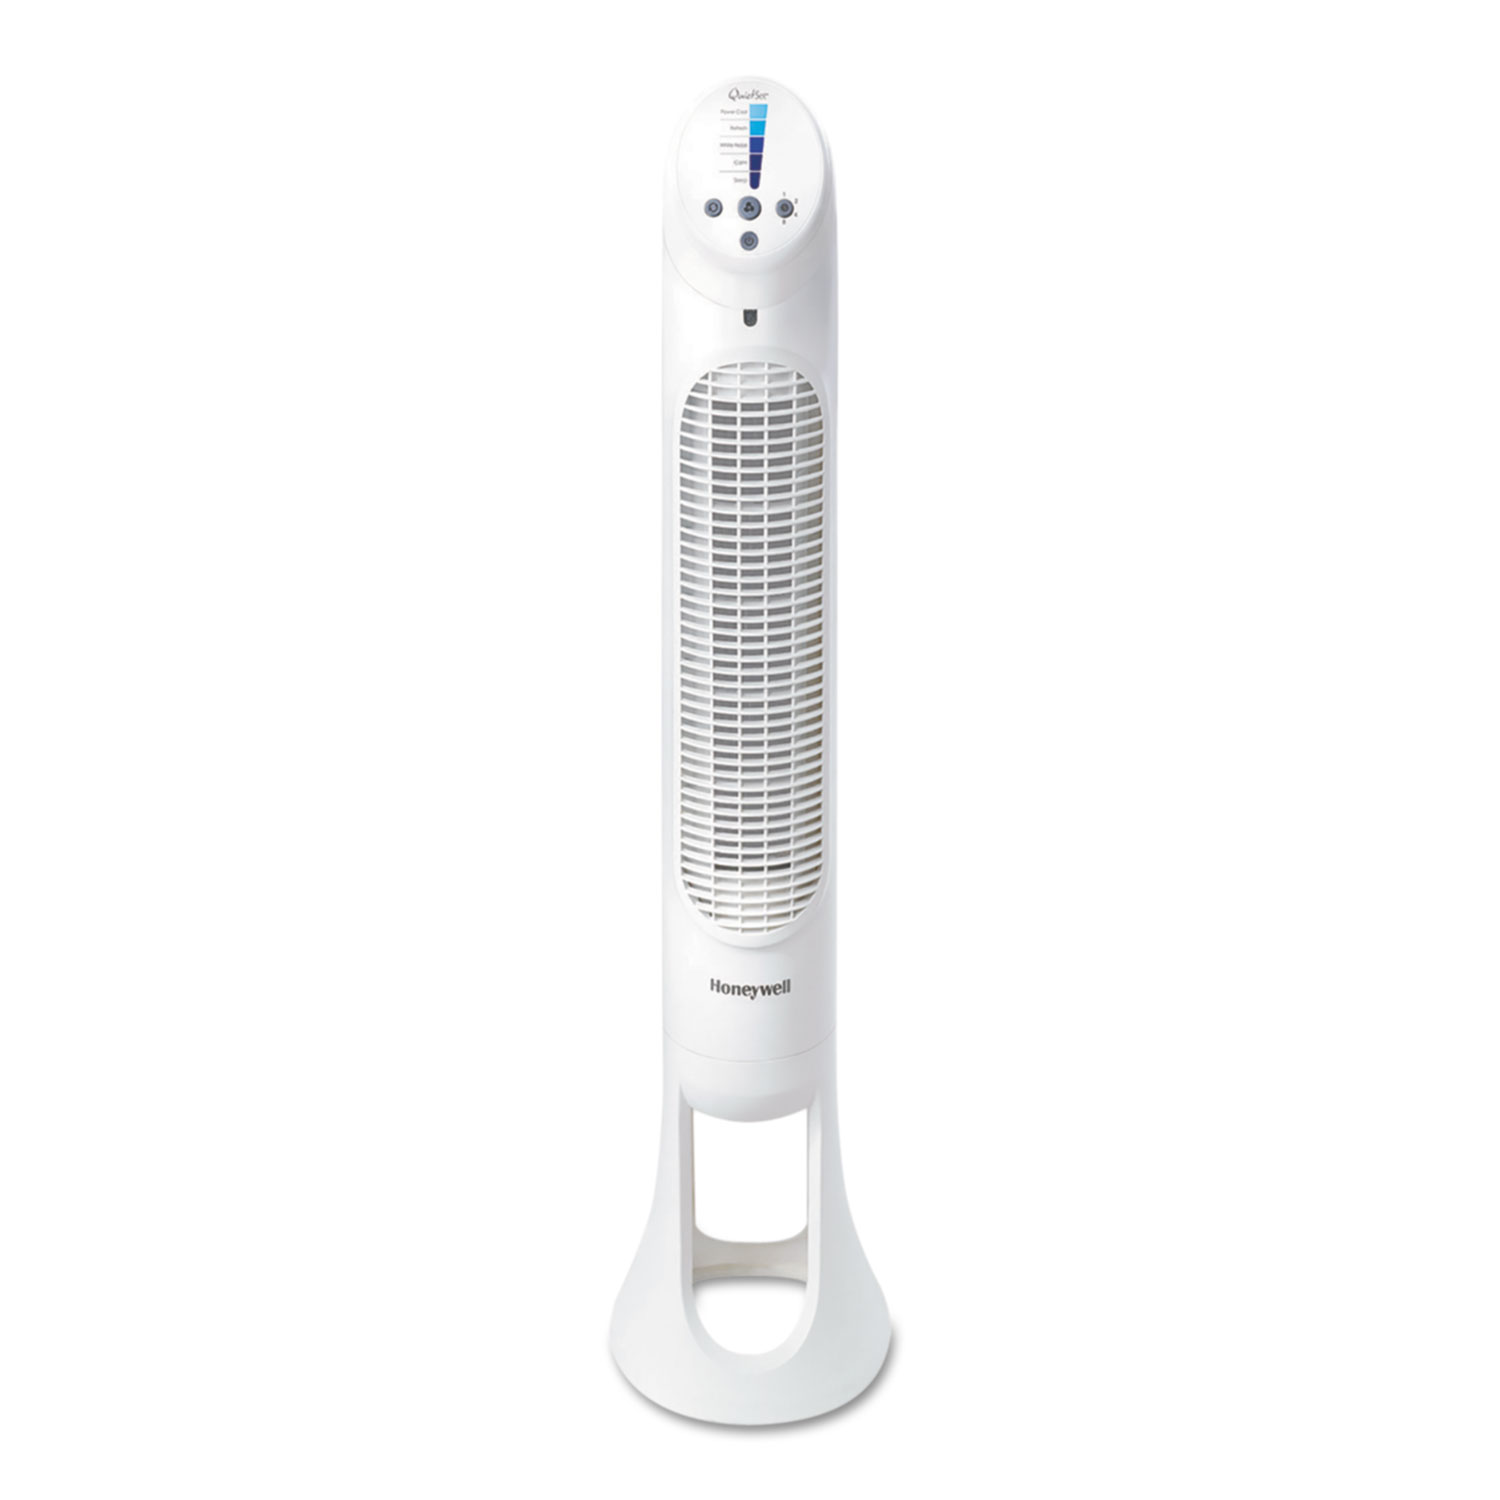  Honeywell HYF260 QuietSet Whole Room Tower Fan, White, 5 Speed (HWLHYF260) 